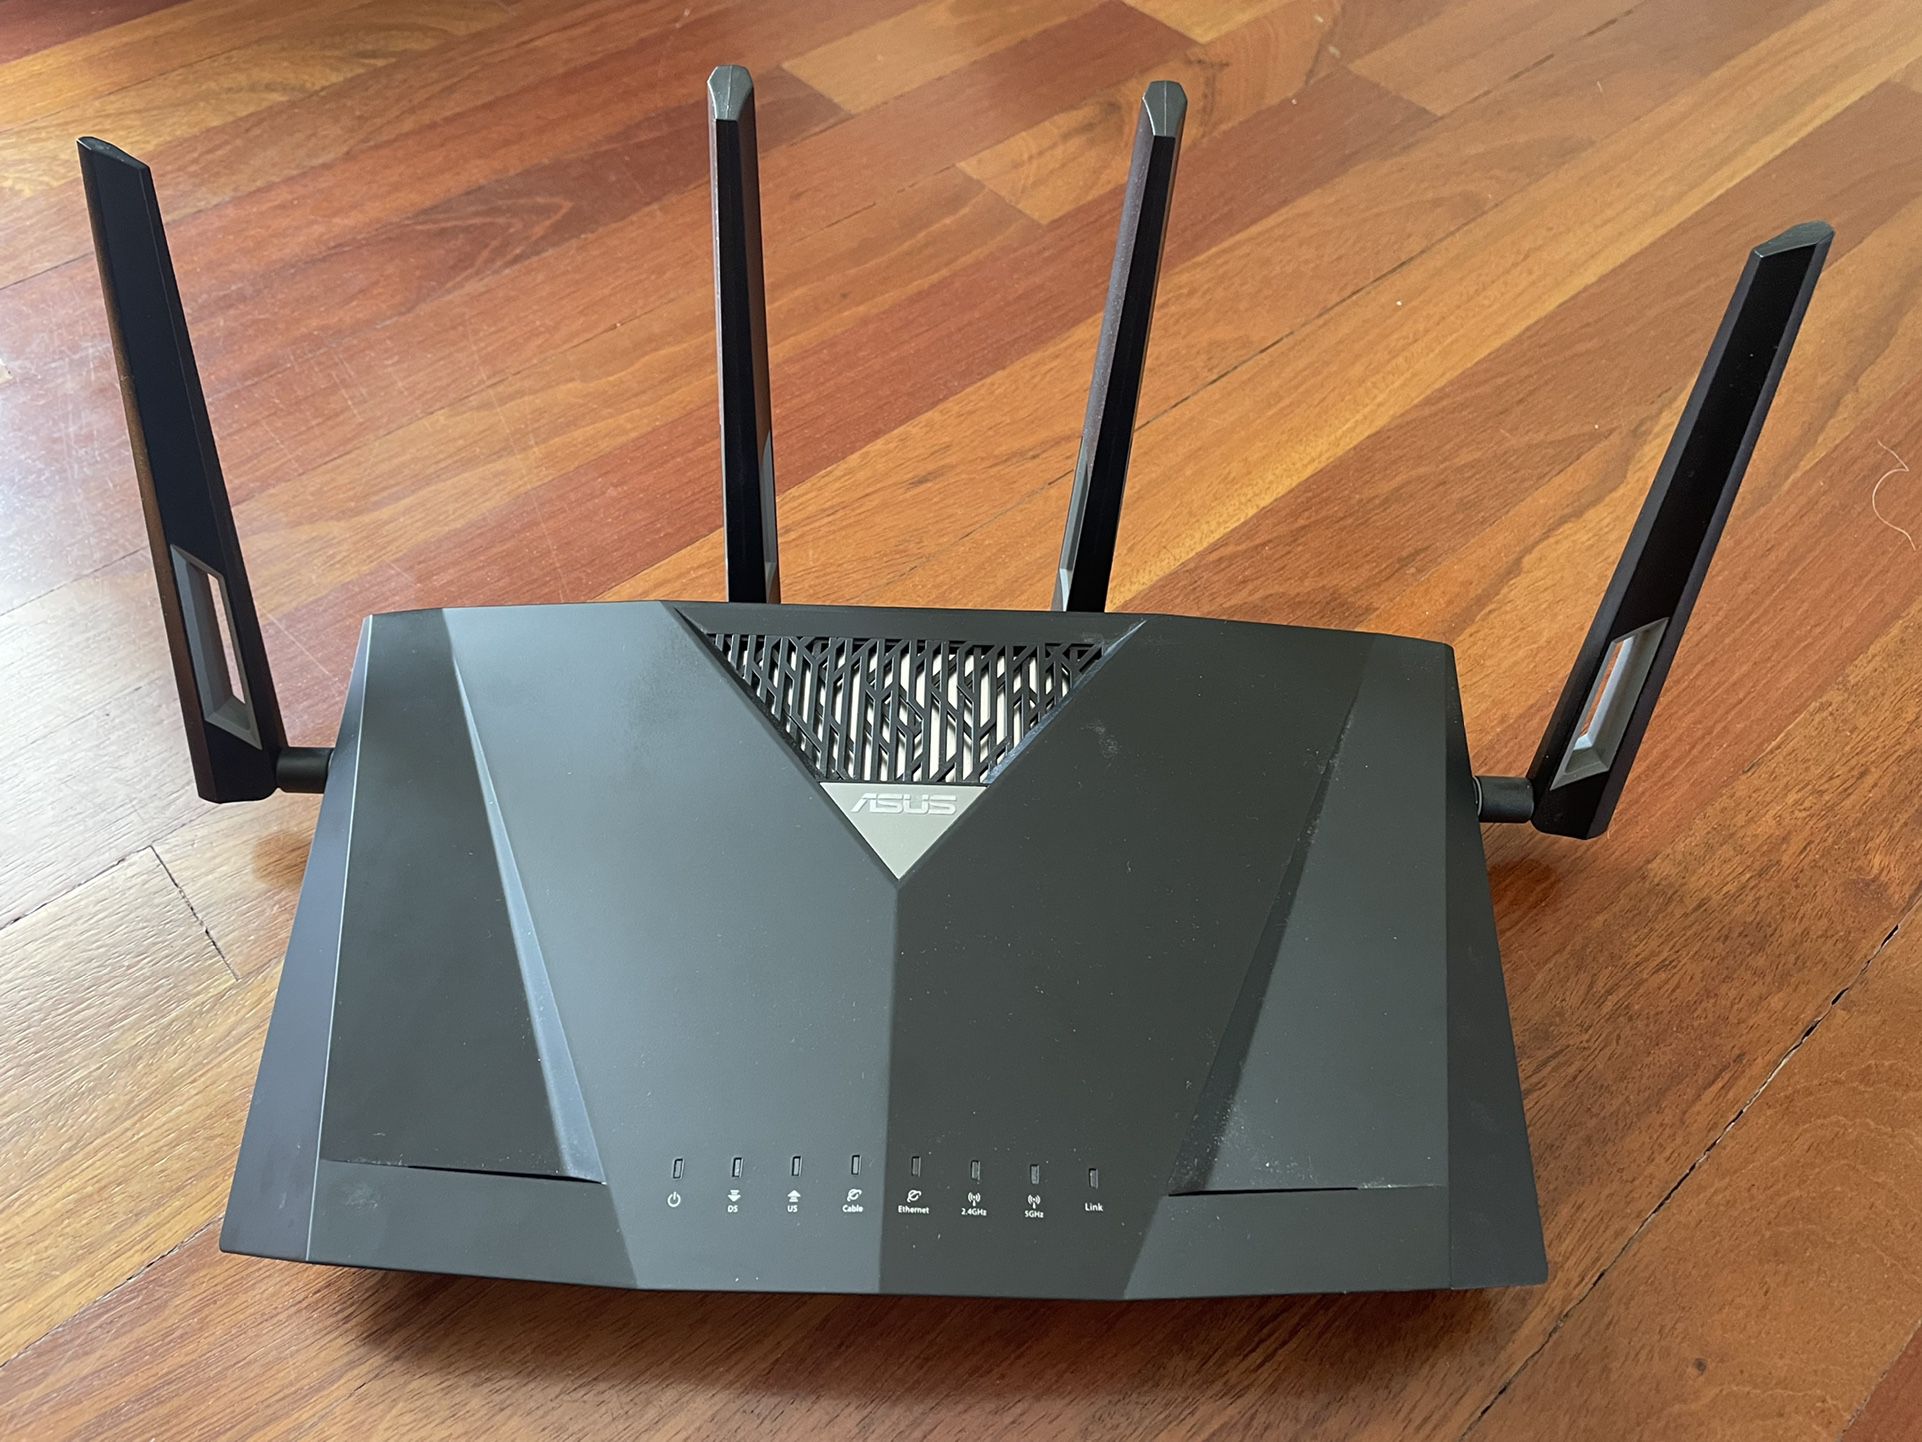 ASUS AC2600 Wireless Router & Modem Combo